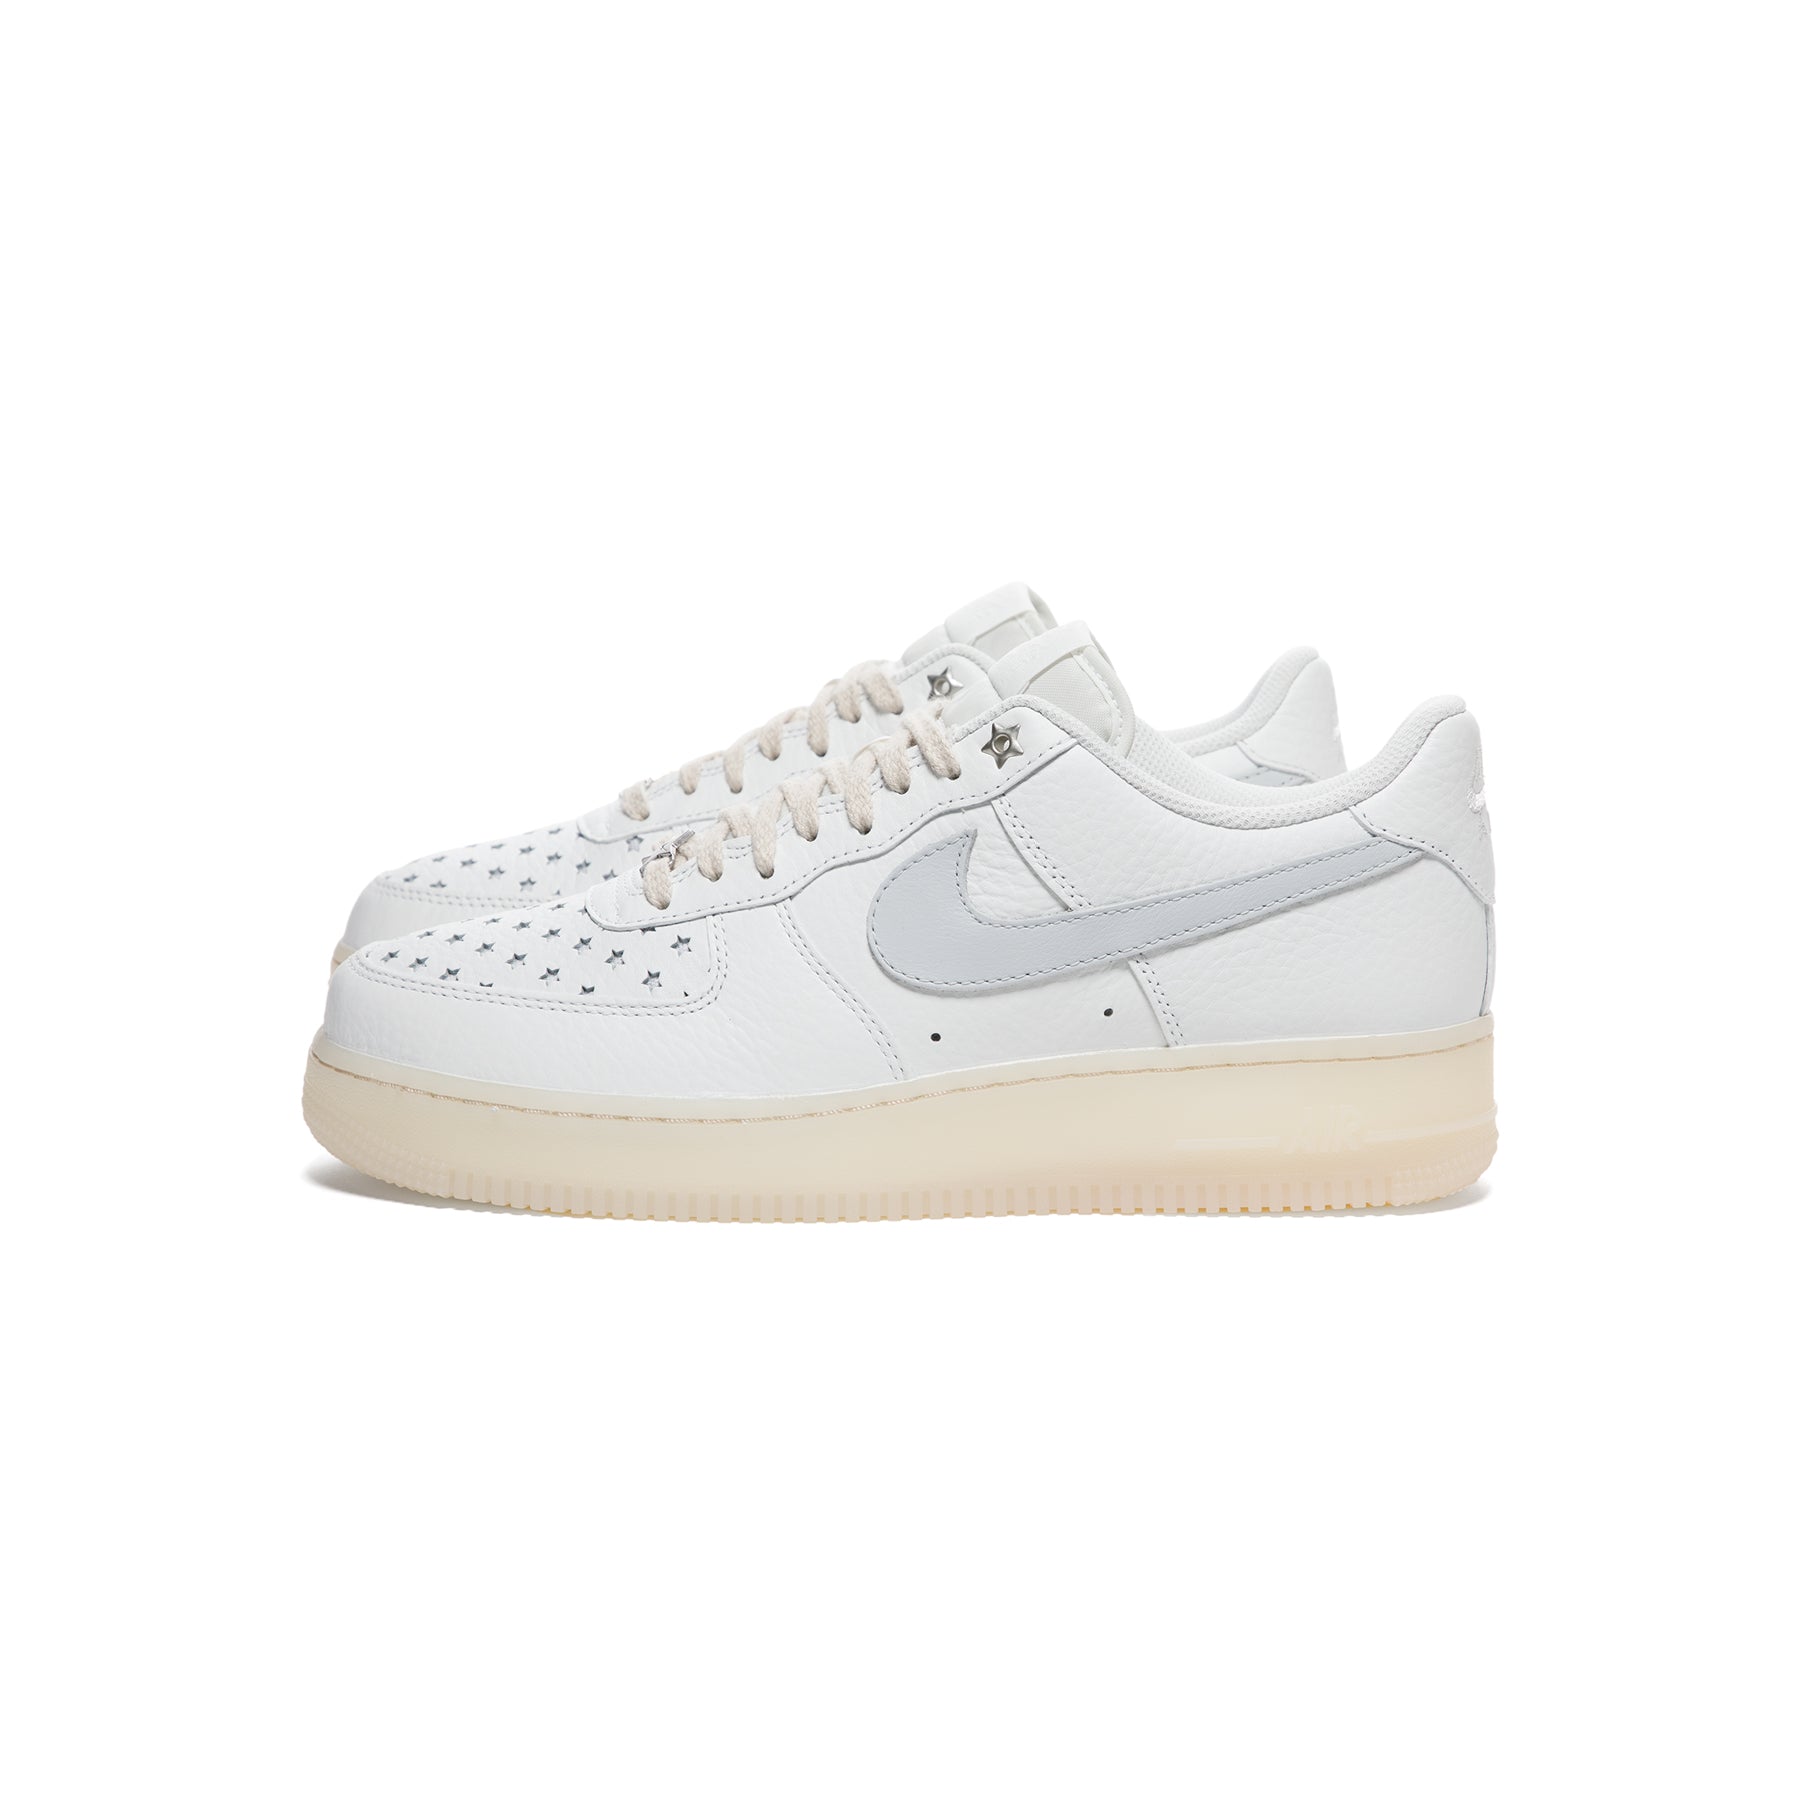 Women's Air Force 1 '07 - Summit White/Pure Platinum – Feature